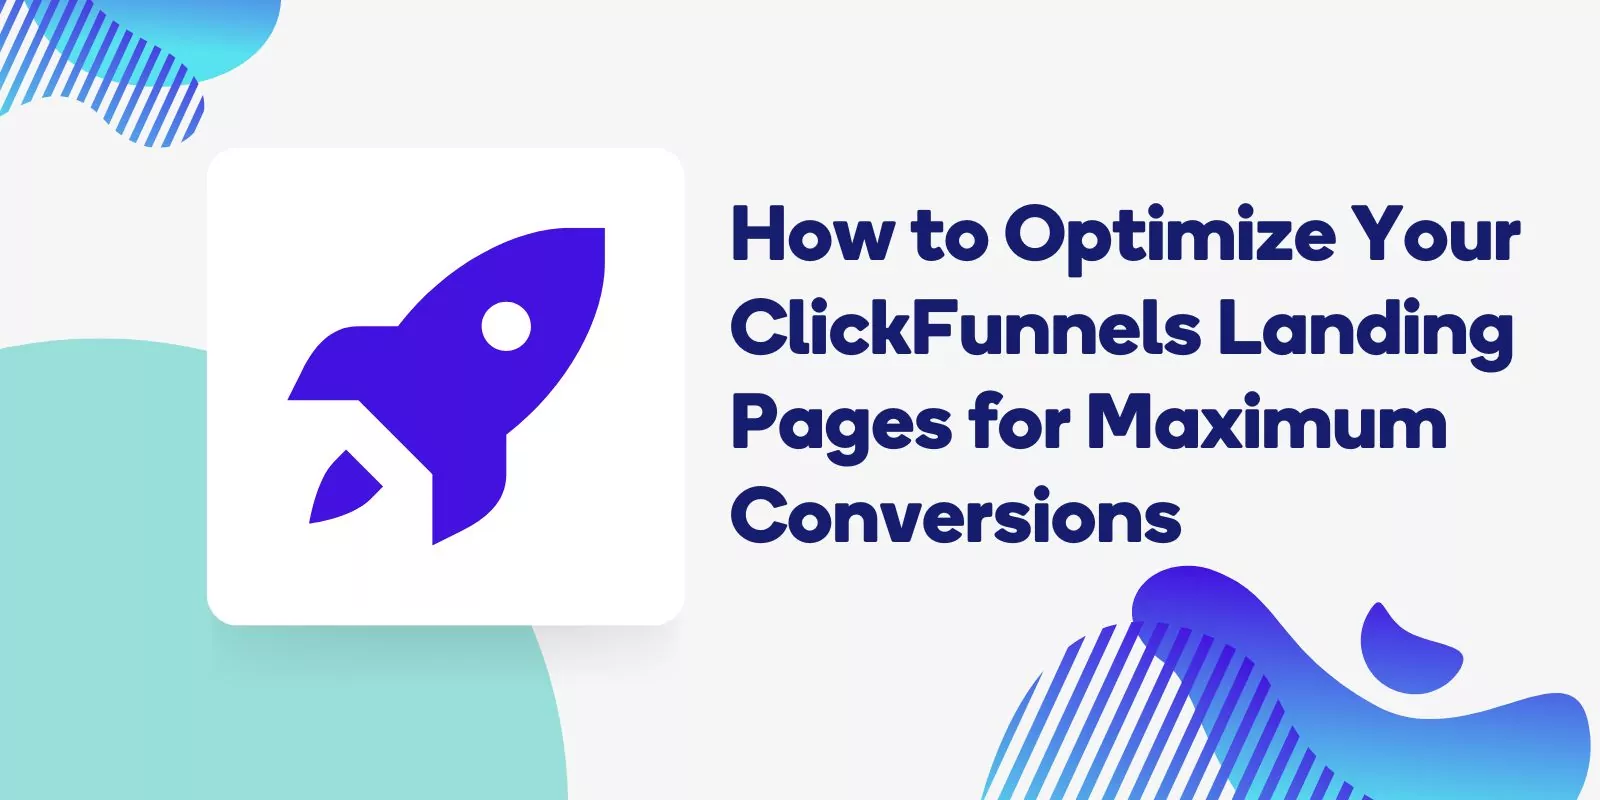 How to Optimize Your ClickFunnels Landing Pages for Maximum Conversions